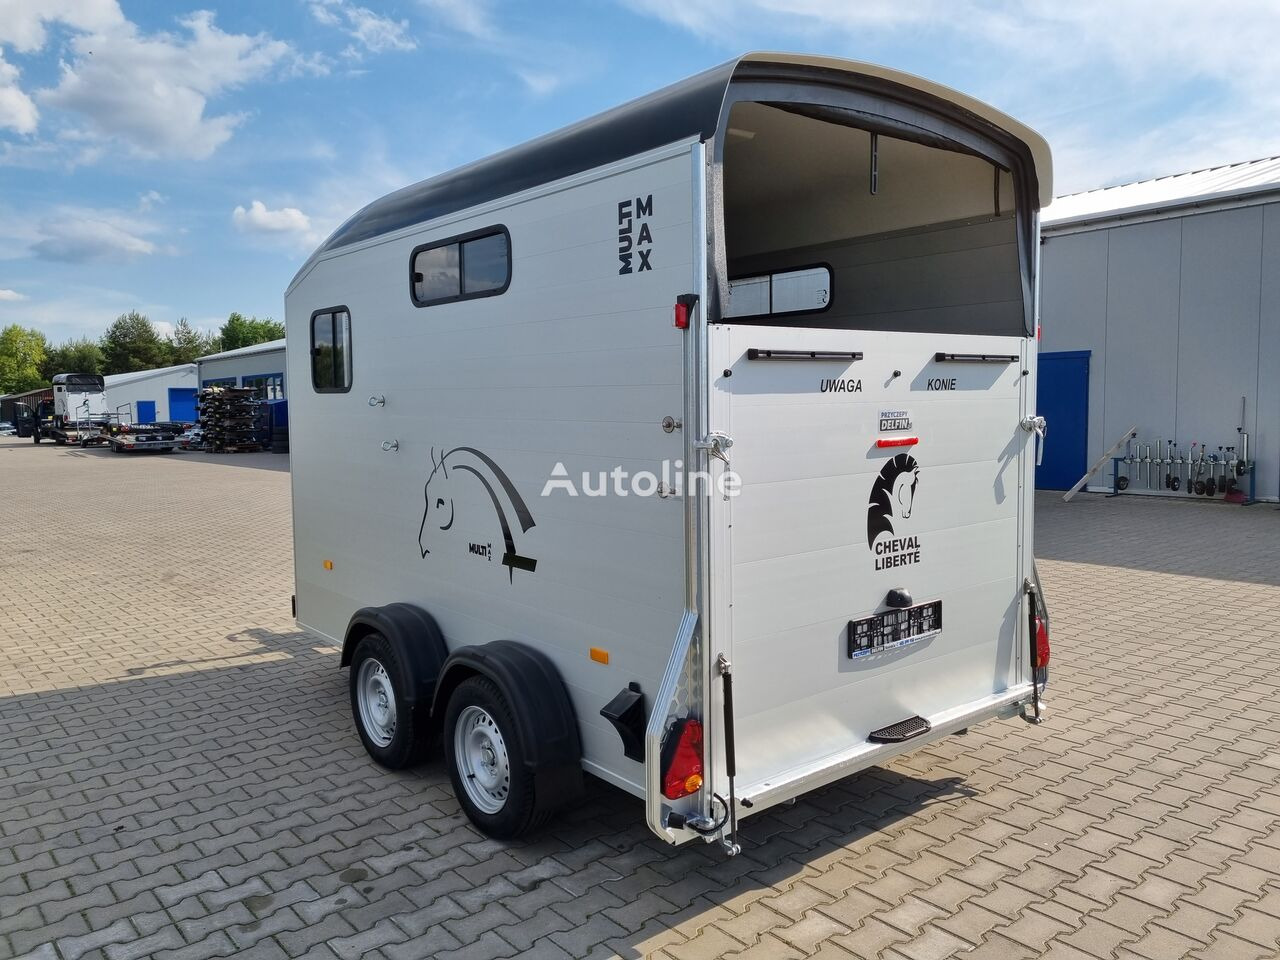 Cheval Liberté Multimax trailer for 2 horses GVW 2600kg big tack room saddle - Horse trailer: picture 5